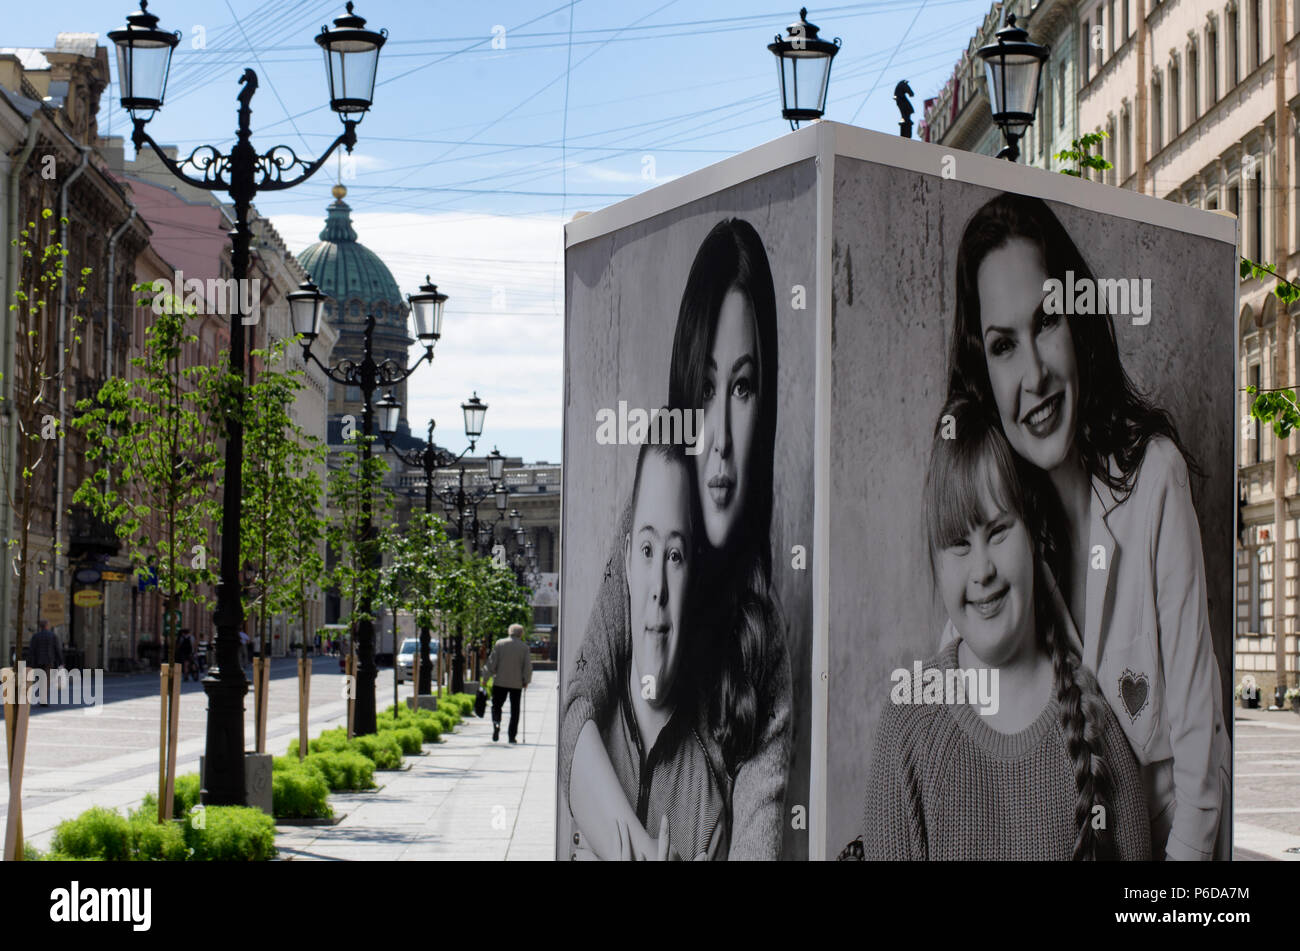 St. Petersburg, Russia - July 23, 2017: Posters with a charity project to help children with Down's syndrome, in which celebrities from Russia Stock Photo